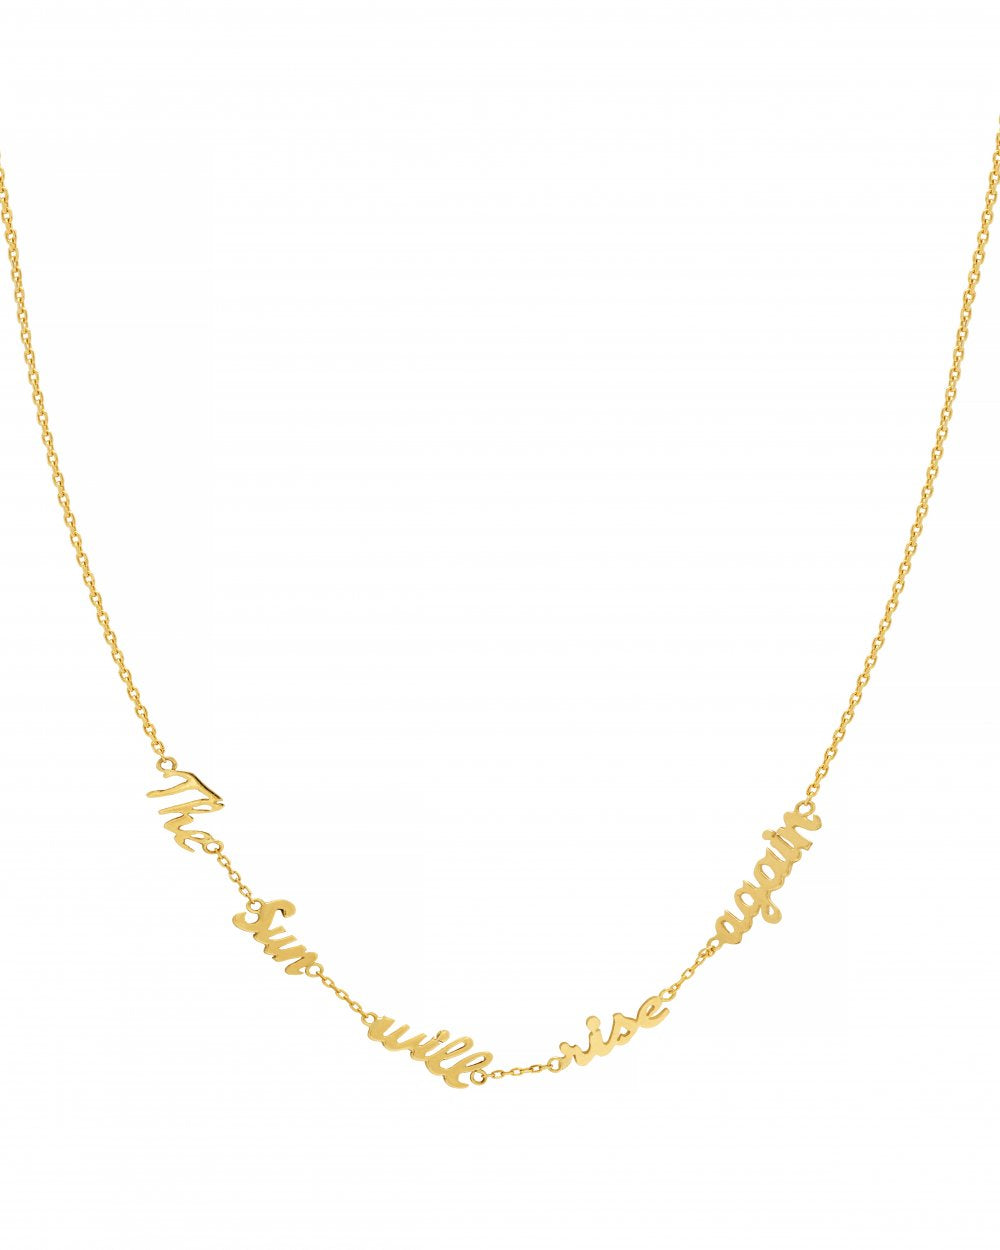 LRJC The Sun Will Rise Again Necklace 18K Gold